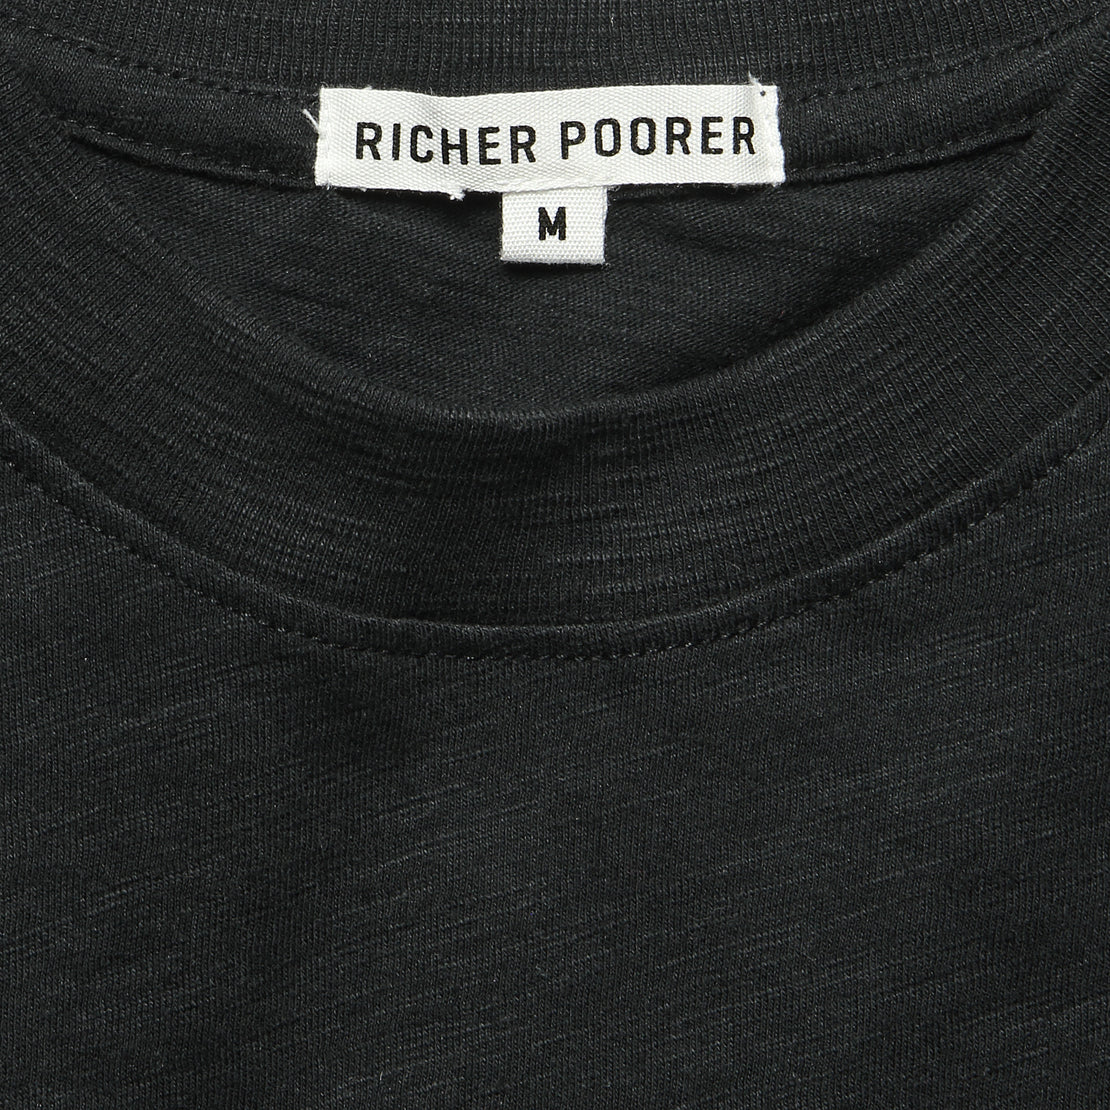 Grown Up Crop Tee - Black - Richer Poorer - STAG Provisions - W - Tops - S/S Tee